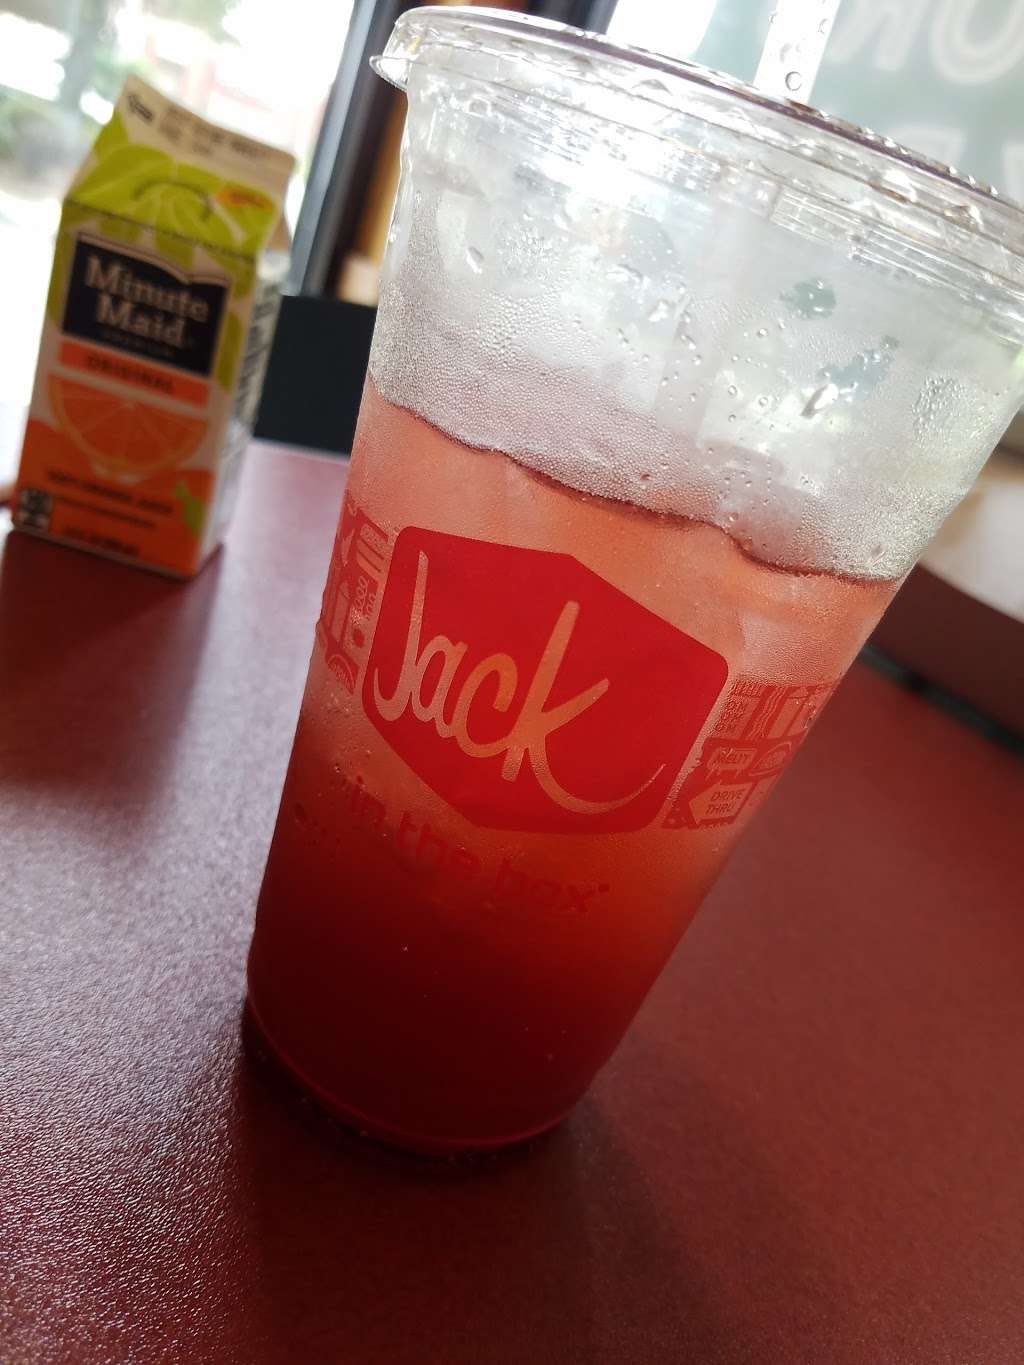 Jack in the Box | 1744 Dulles Ave, Sugar Land, TX 77478 | Phone: (832) 503-9443